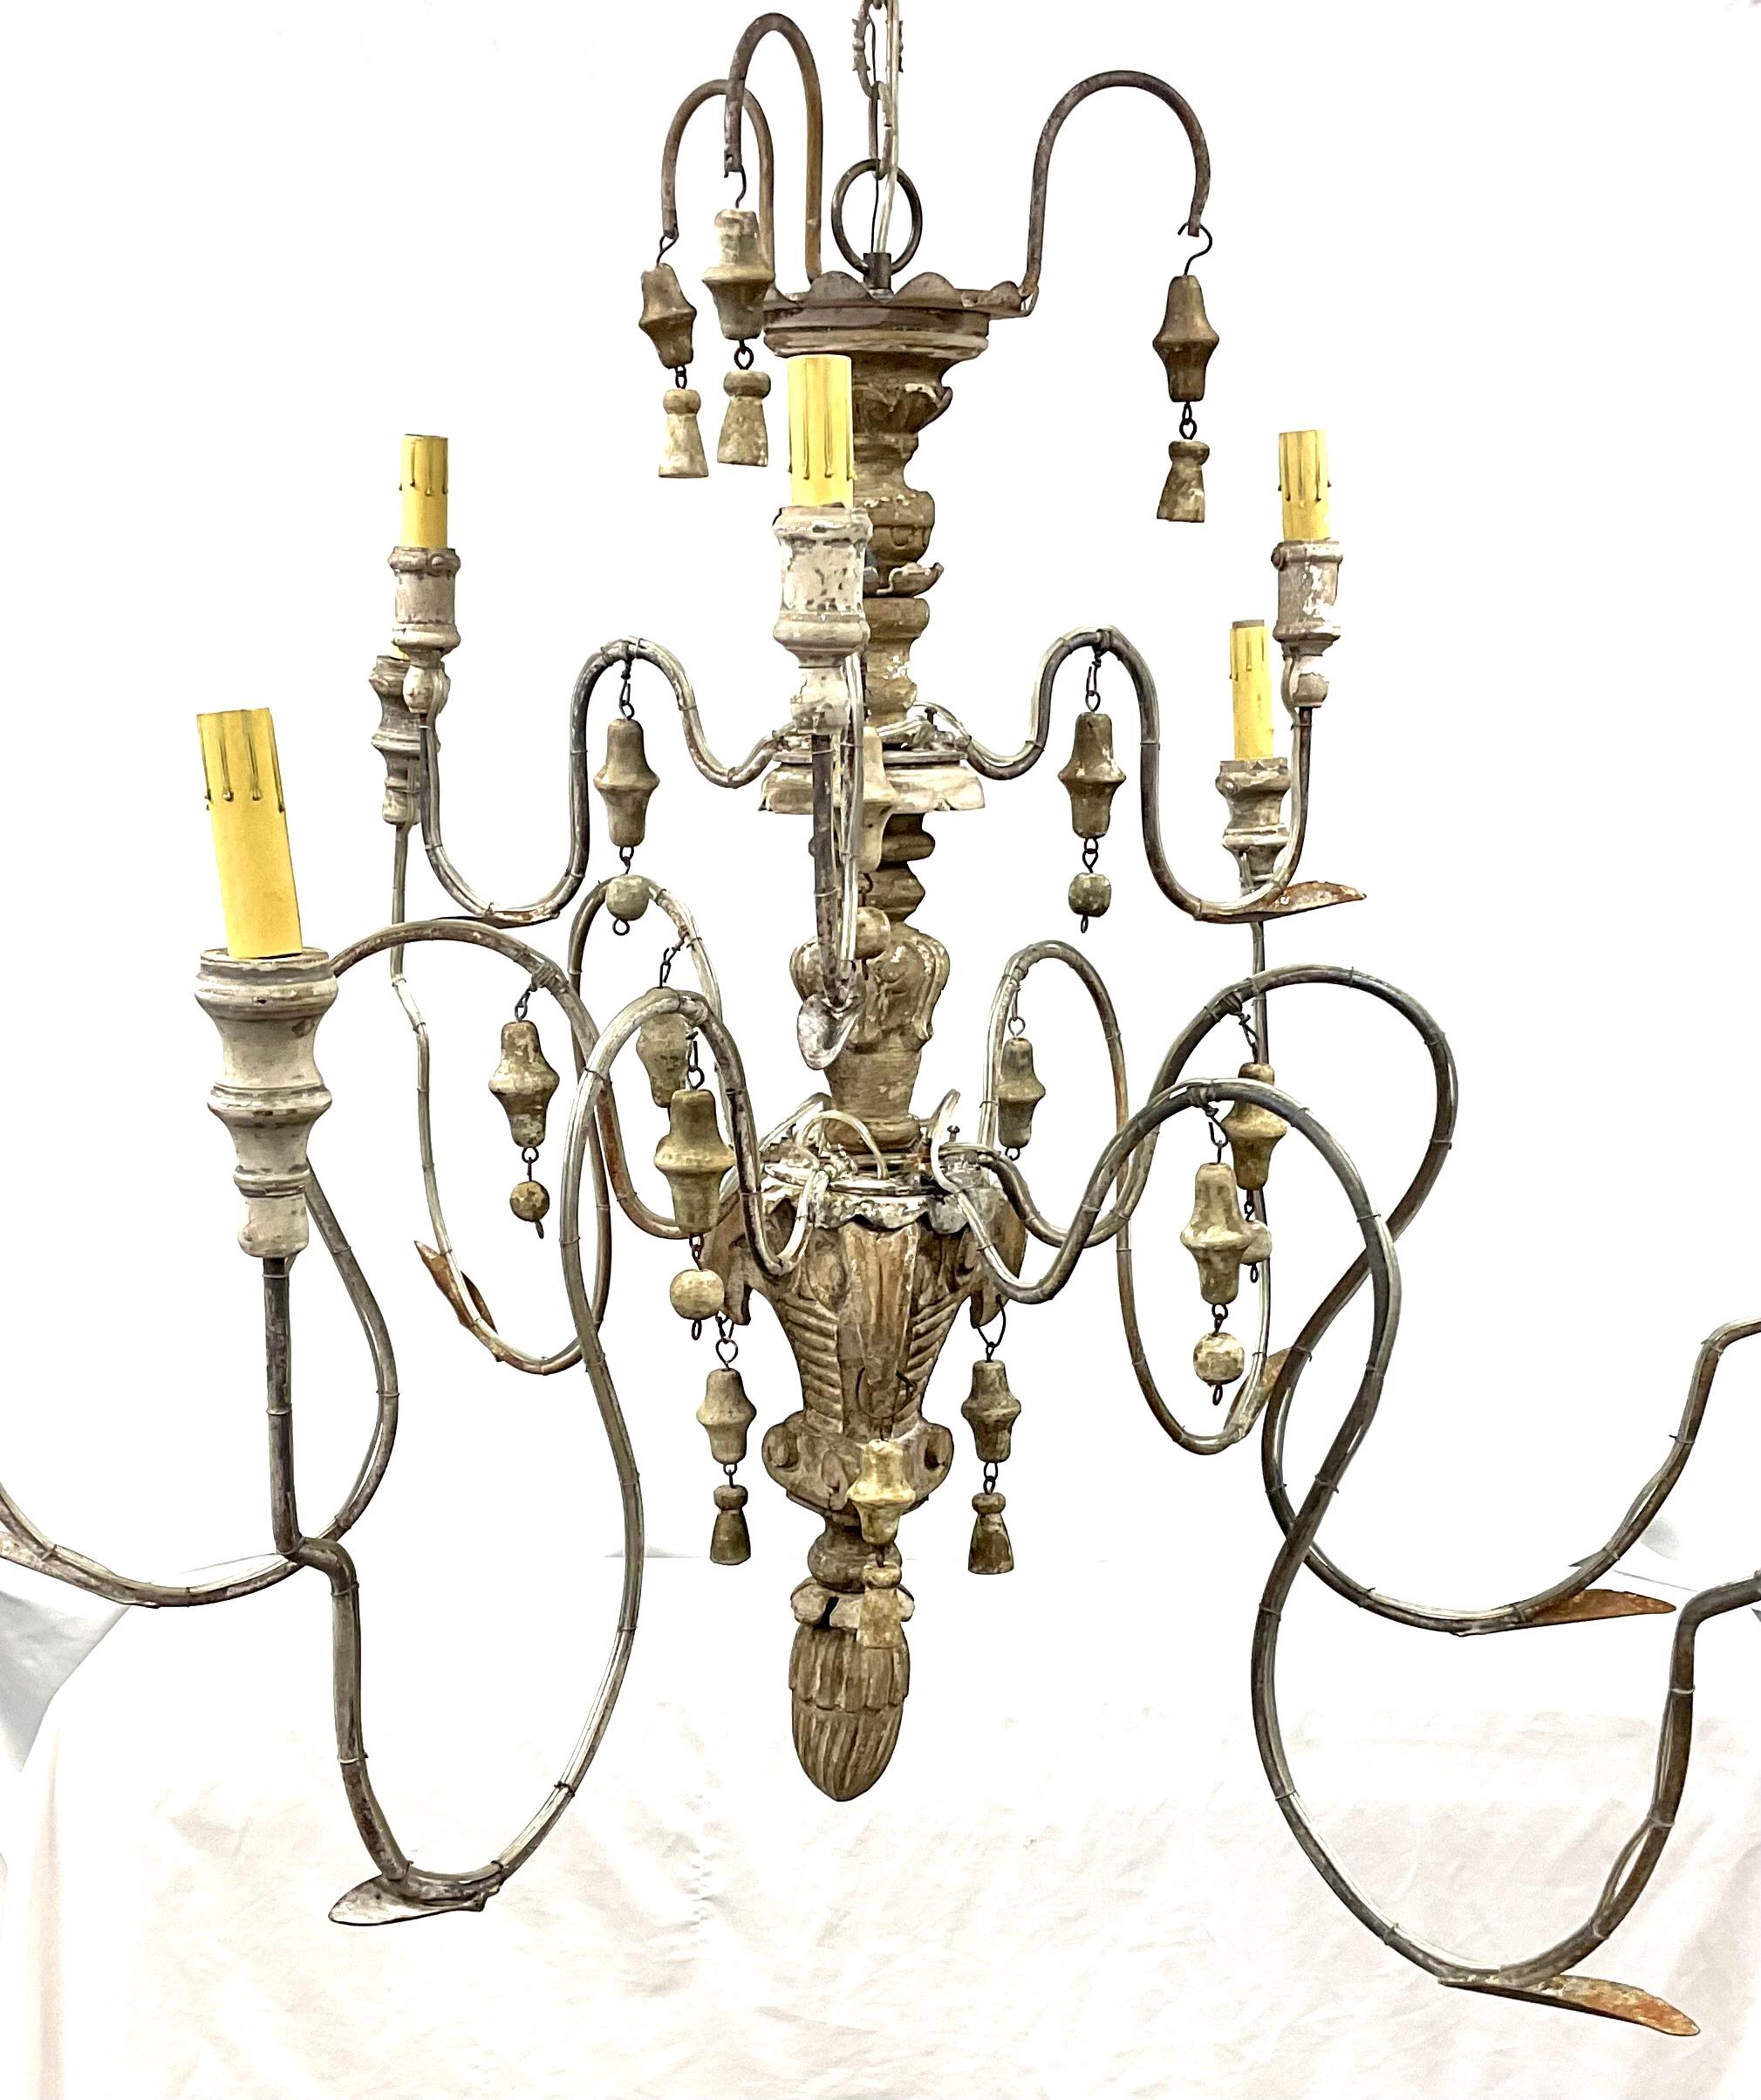 An Italian nine arm chandelier comprised of antique elements. Aged patina and neutral colors. Scrolling wrought iron arms with carved and turned grey painted wood baluster, gilt wood tassel and bell hanging decoration, all now with a wonderful aged